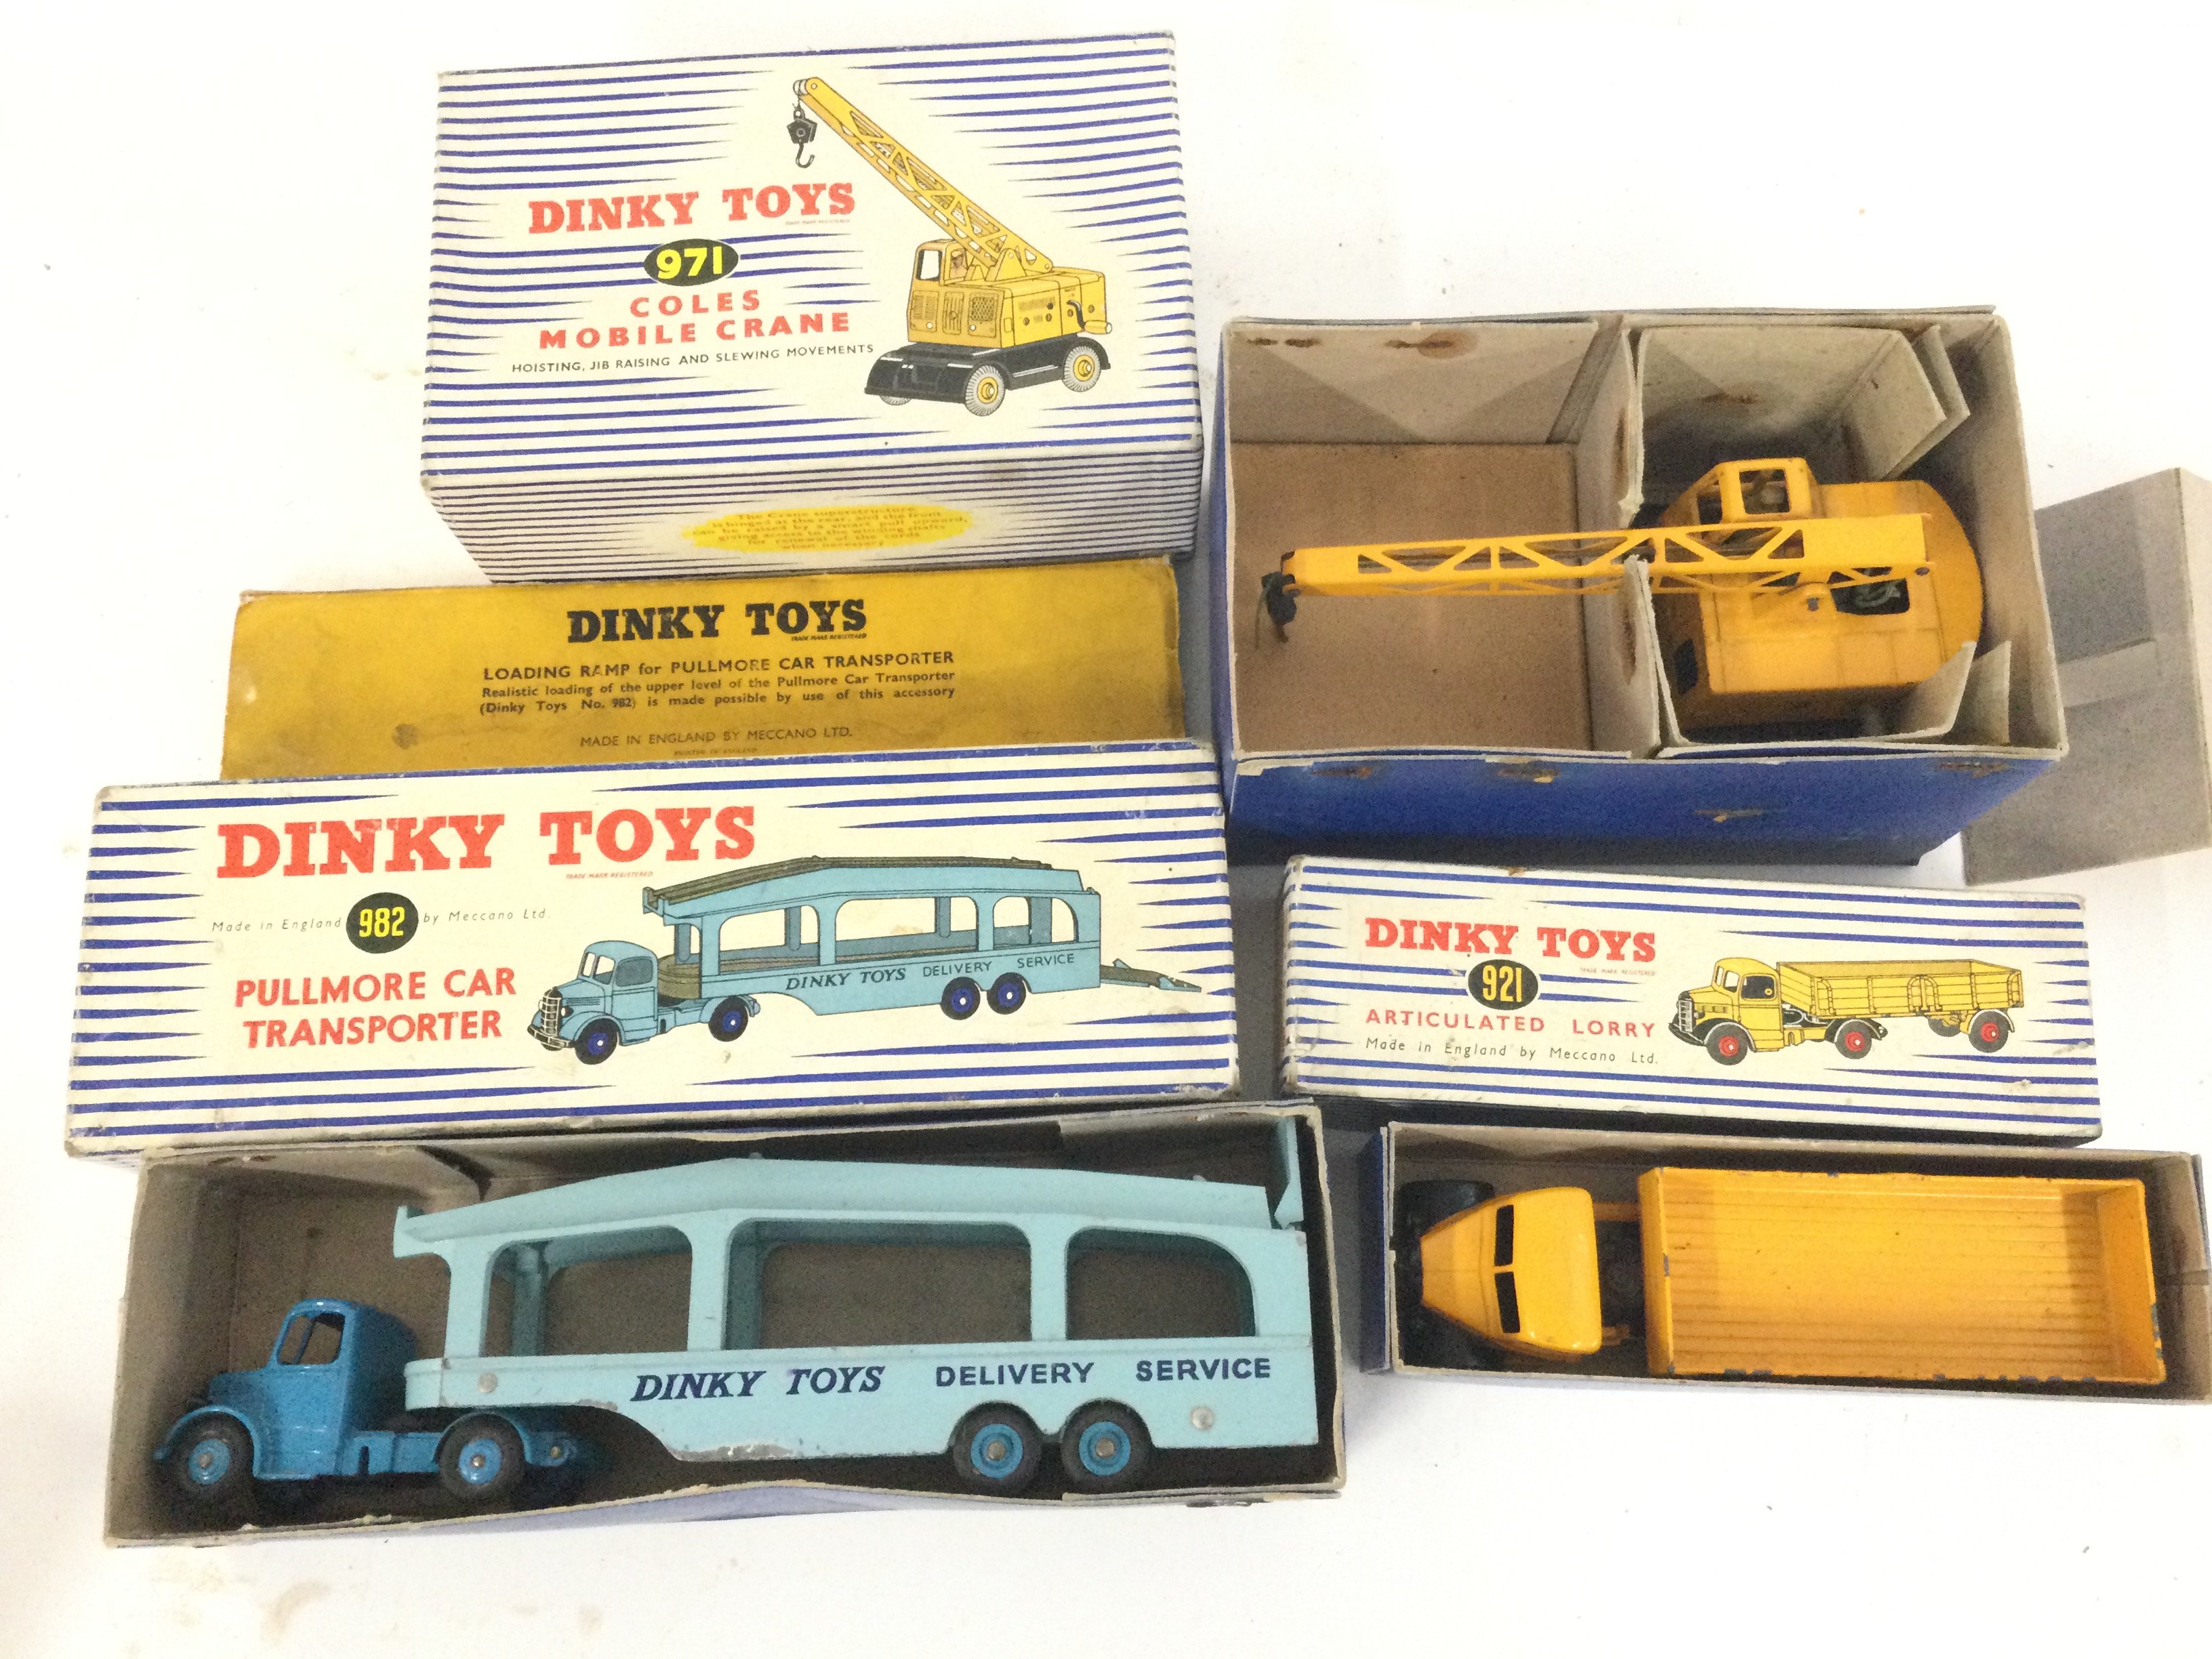 A Collection of Boxed Dinky Toys Including Pullmore Car Transporter. Coles Mobile Crane. Articulated - Bild 5 aus 5